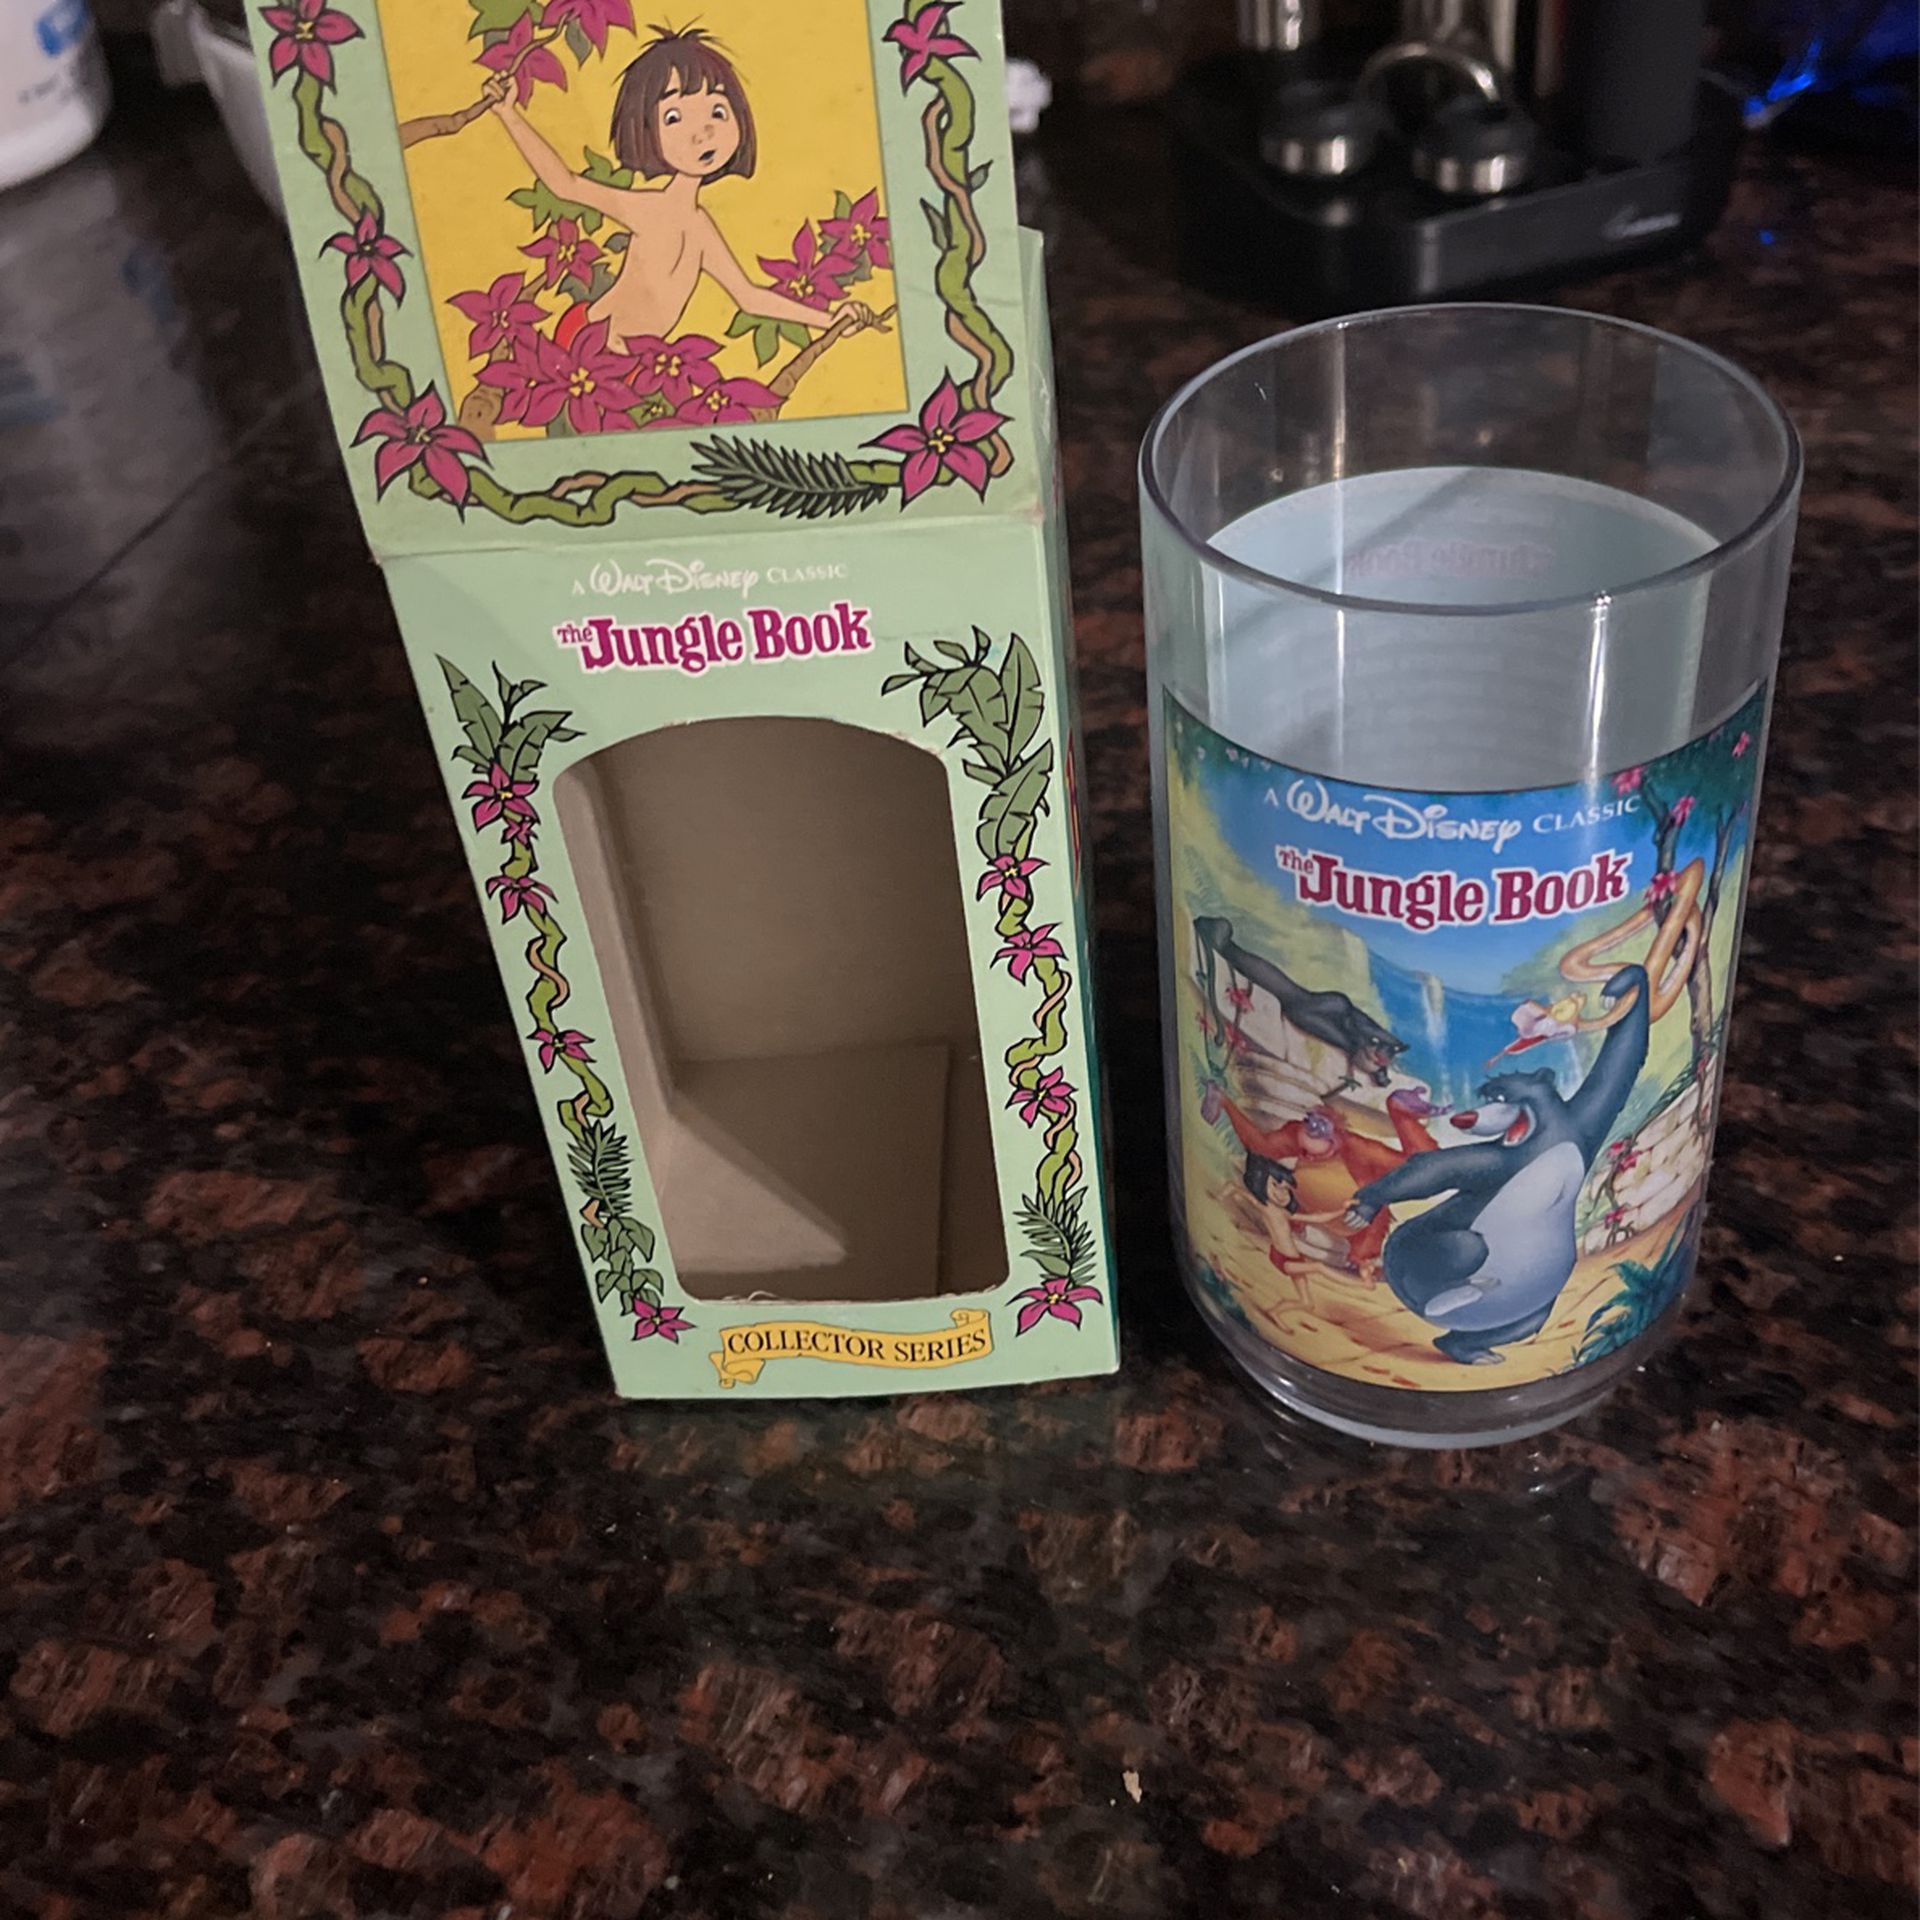 1994 Disney Collectors Glass Never Used Mint Condition In Box